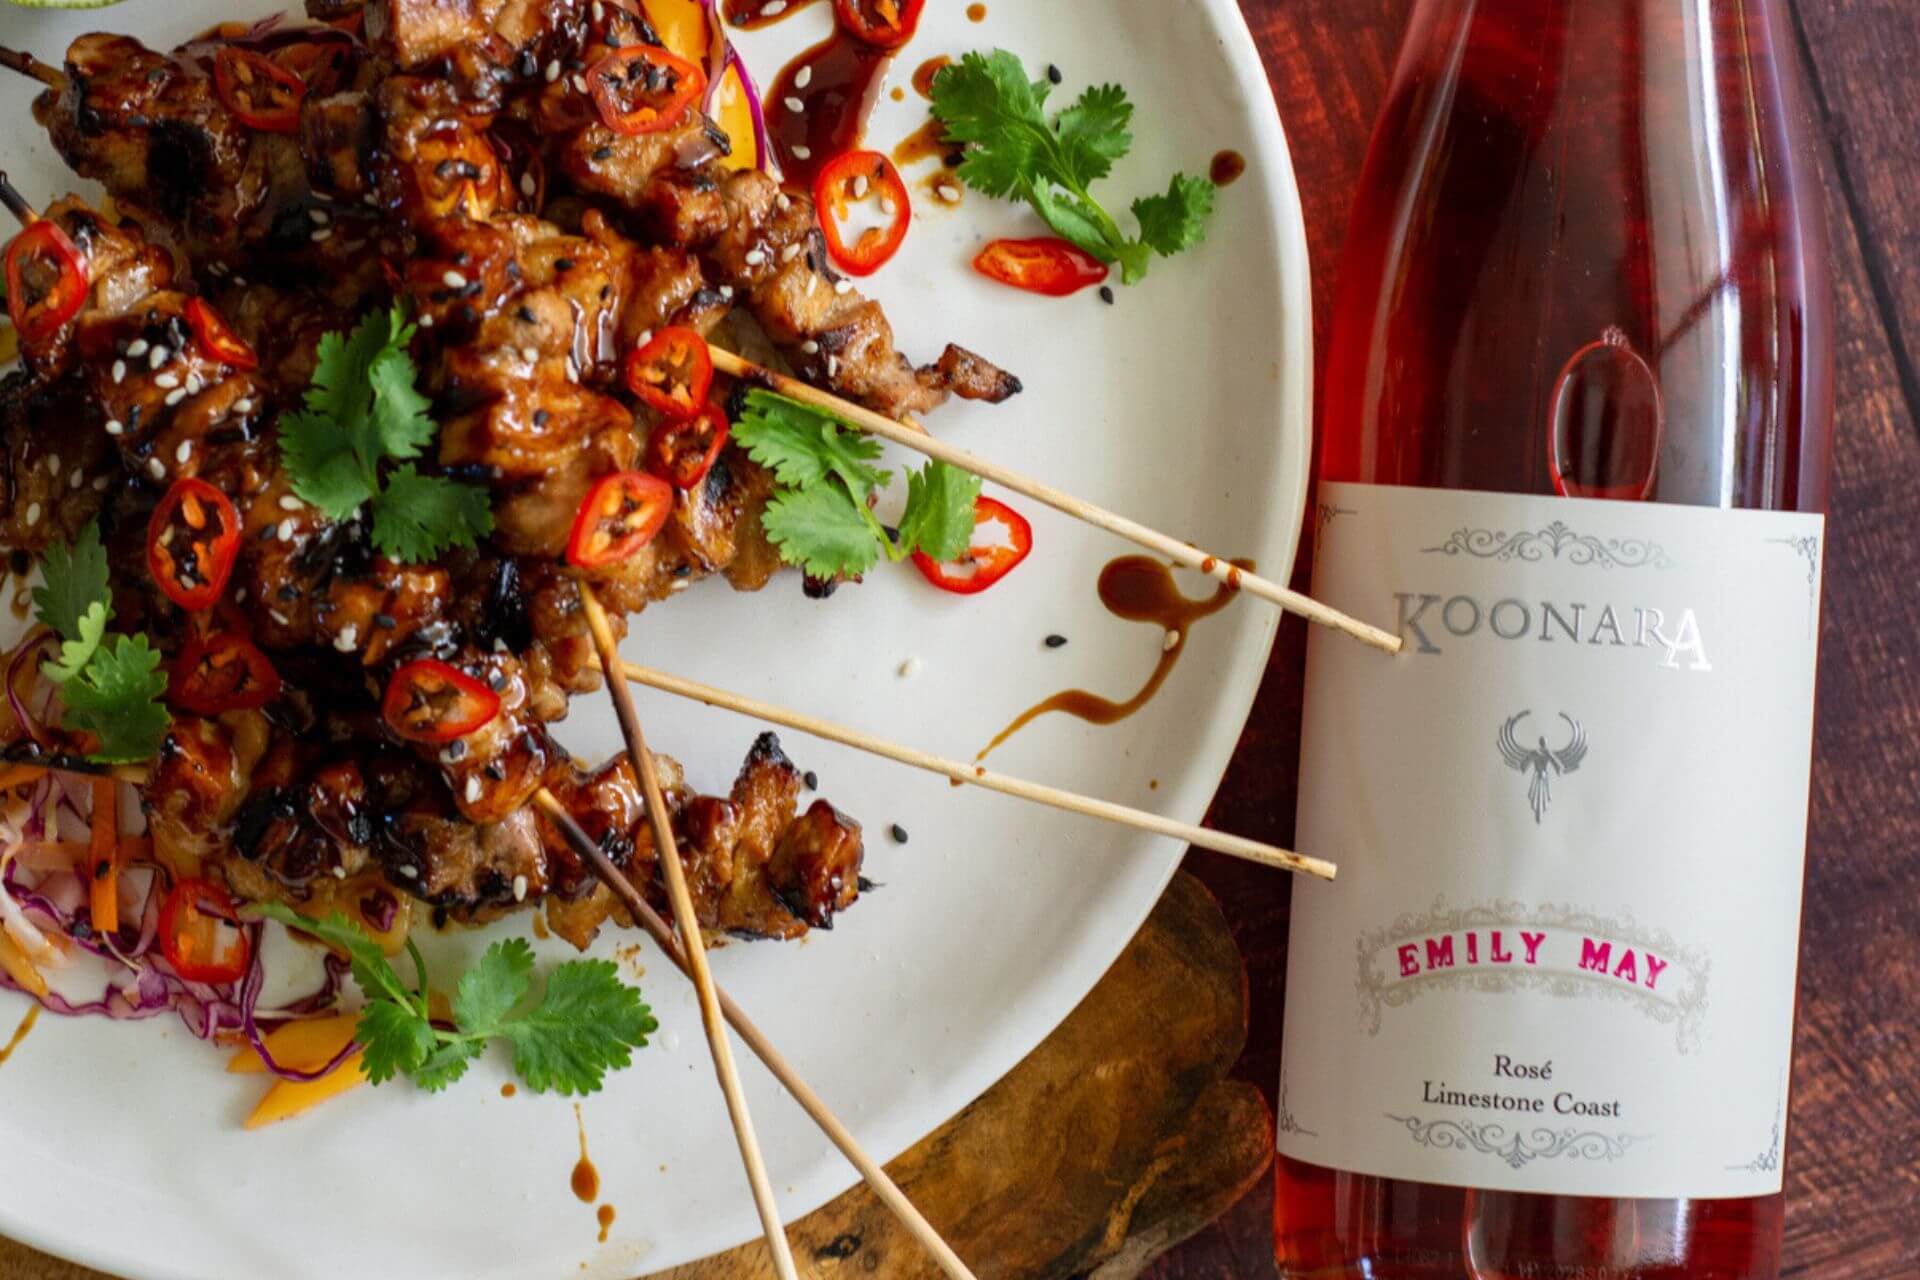 The Pork belly Skewers on a plate with a bottle of Email May Rose alongside it since they pair so well together